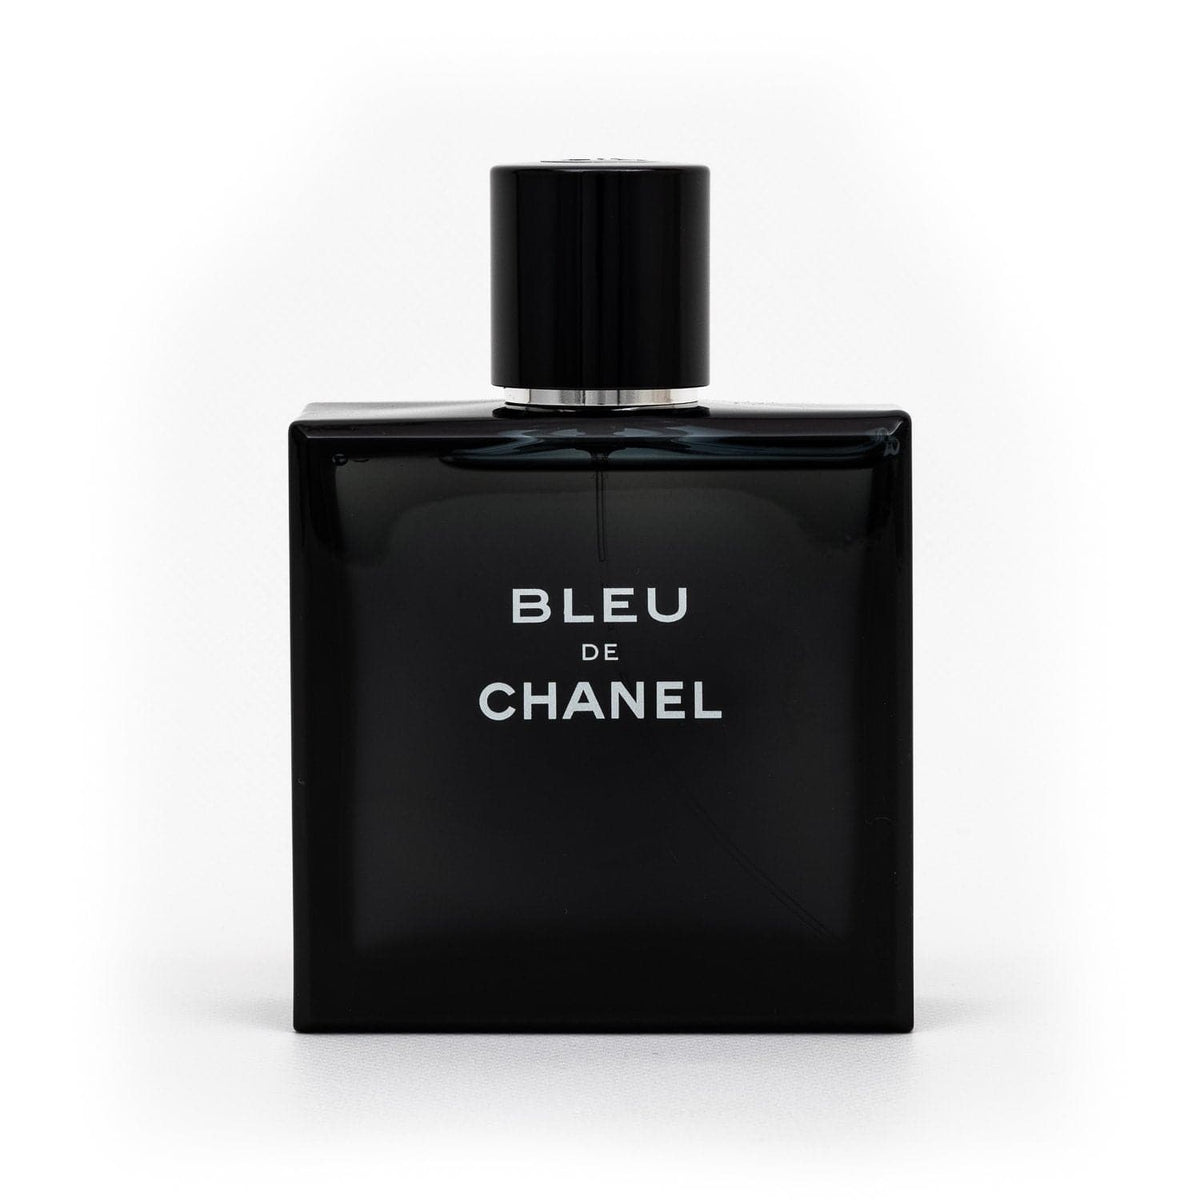 Blue de Chanel perfume: Discover the epitome of sophistication and